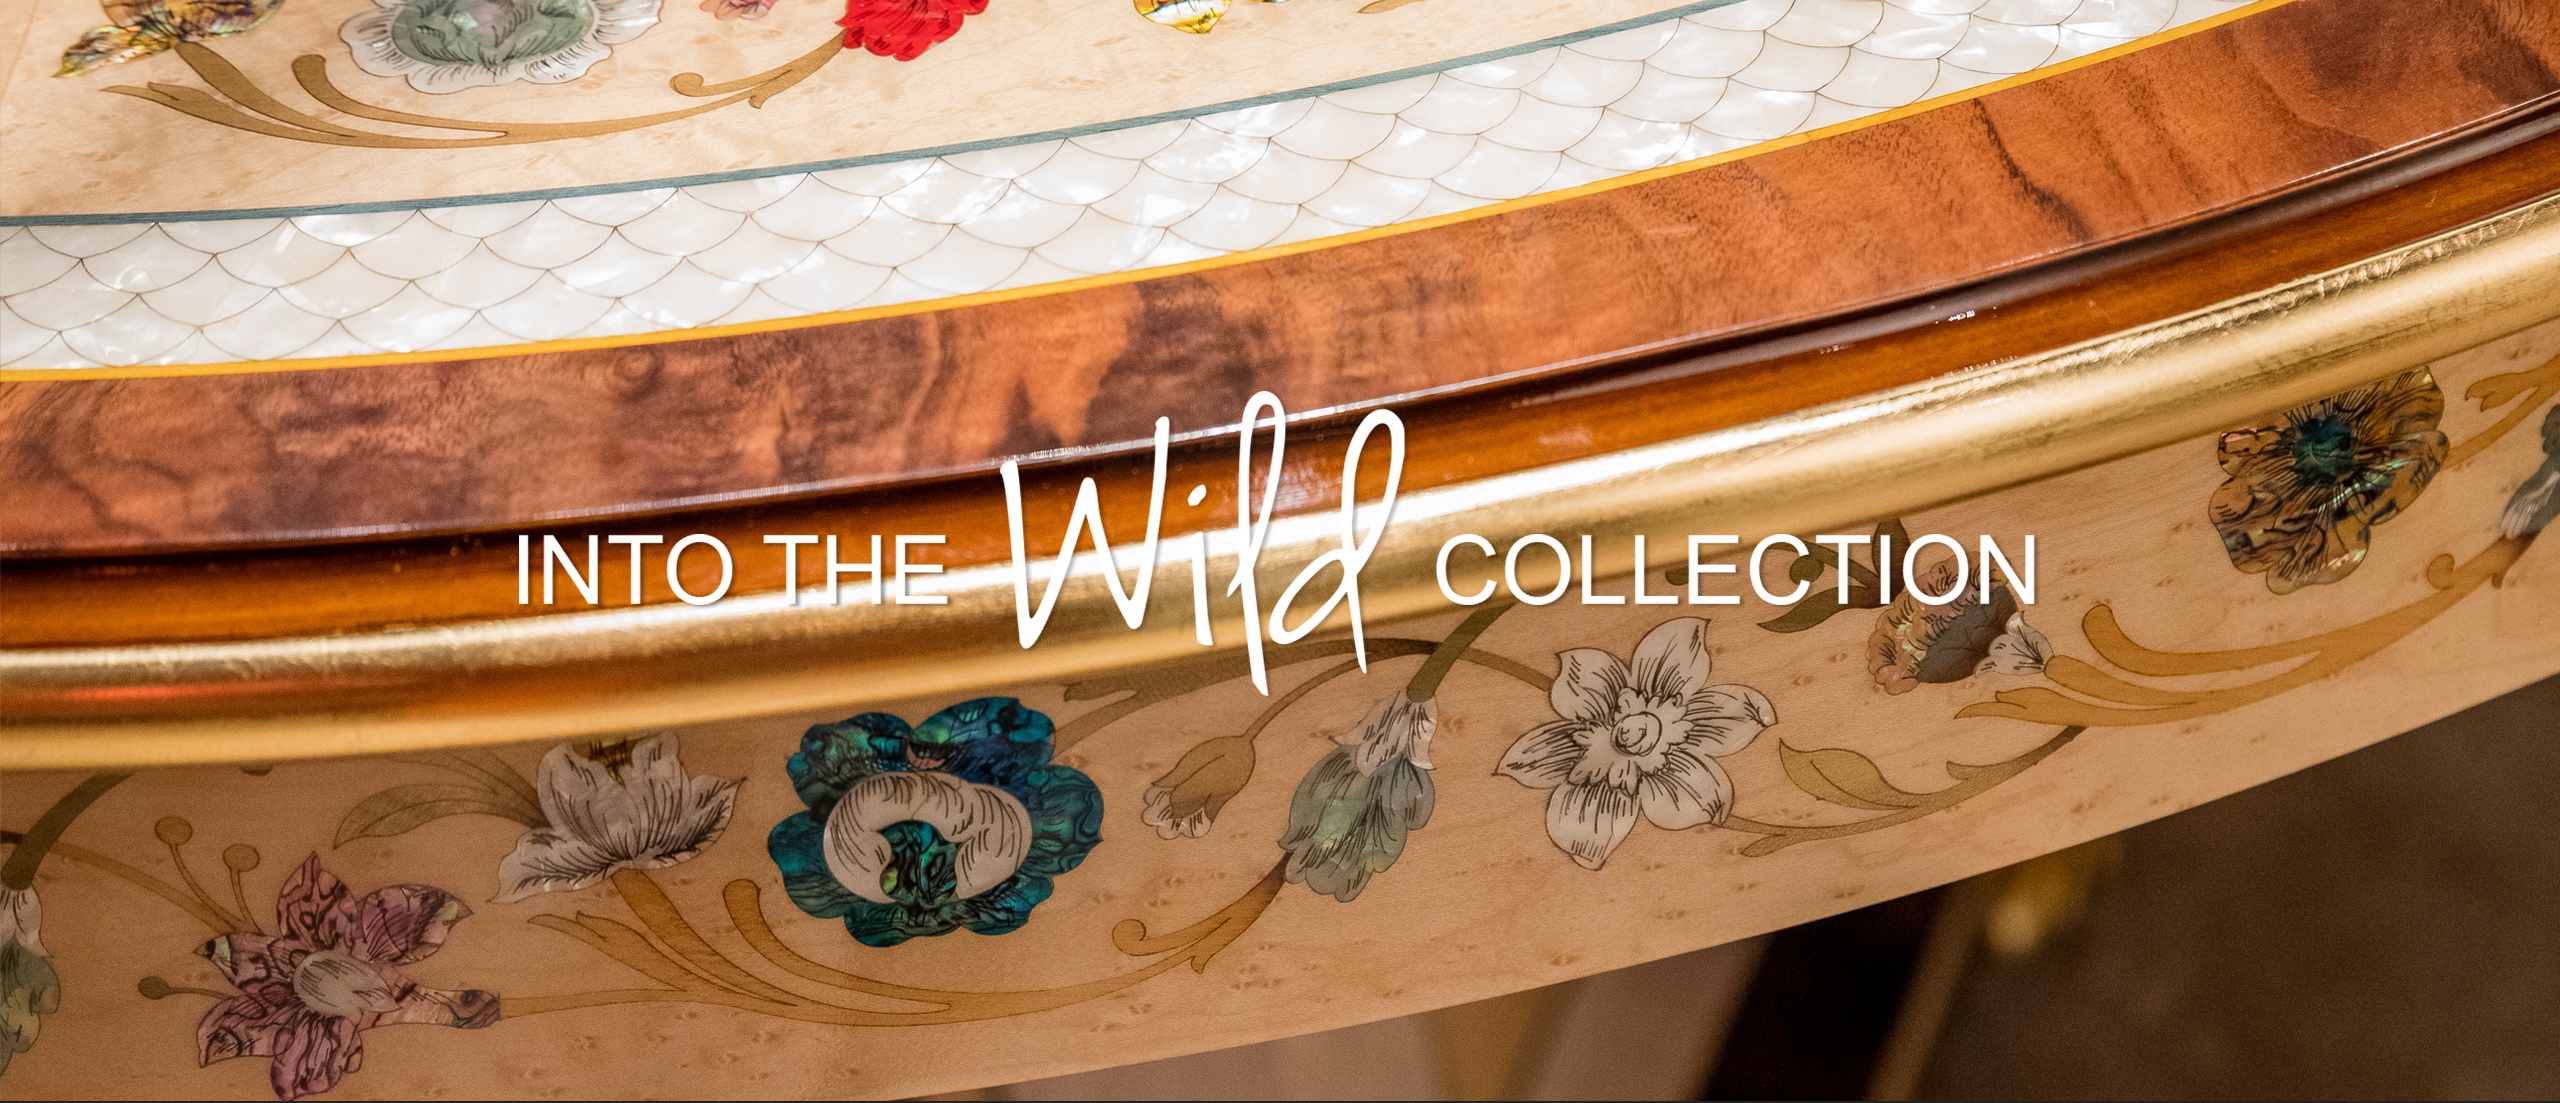 into-the-wild-collection-large